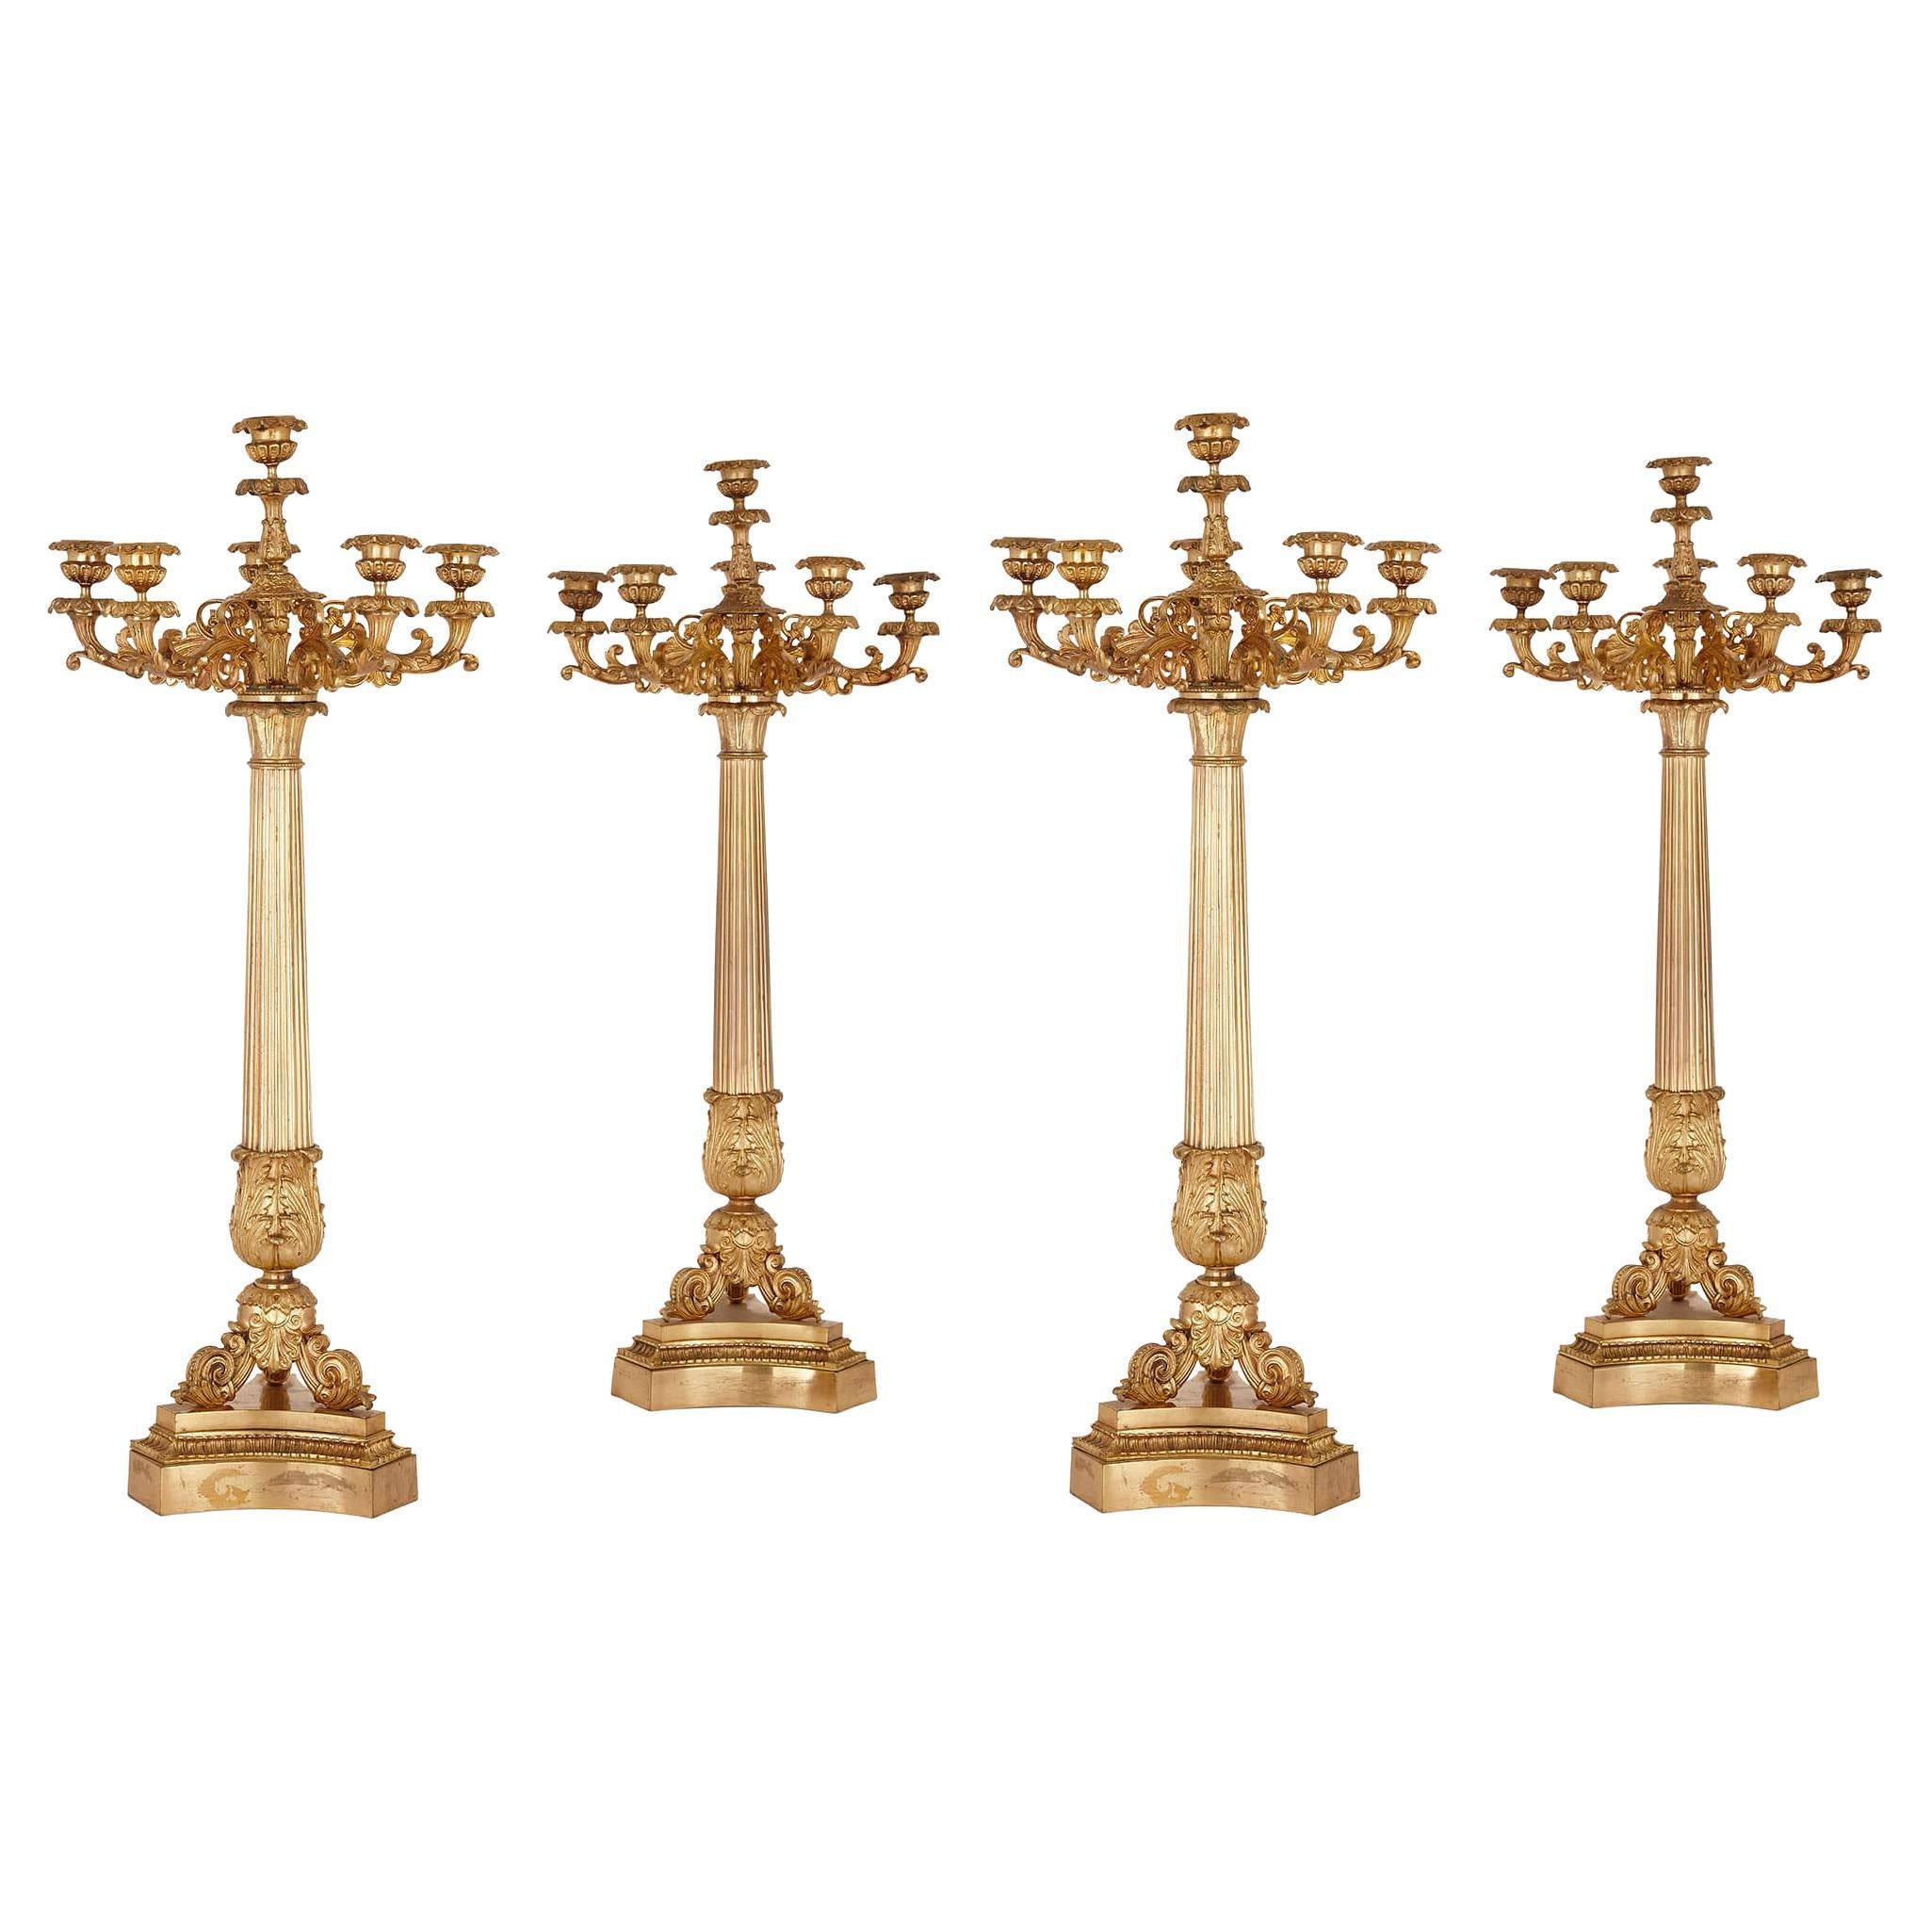 Set of Four Gilt Bronze Table Candelabra by Picard